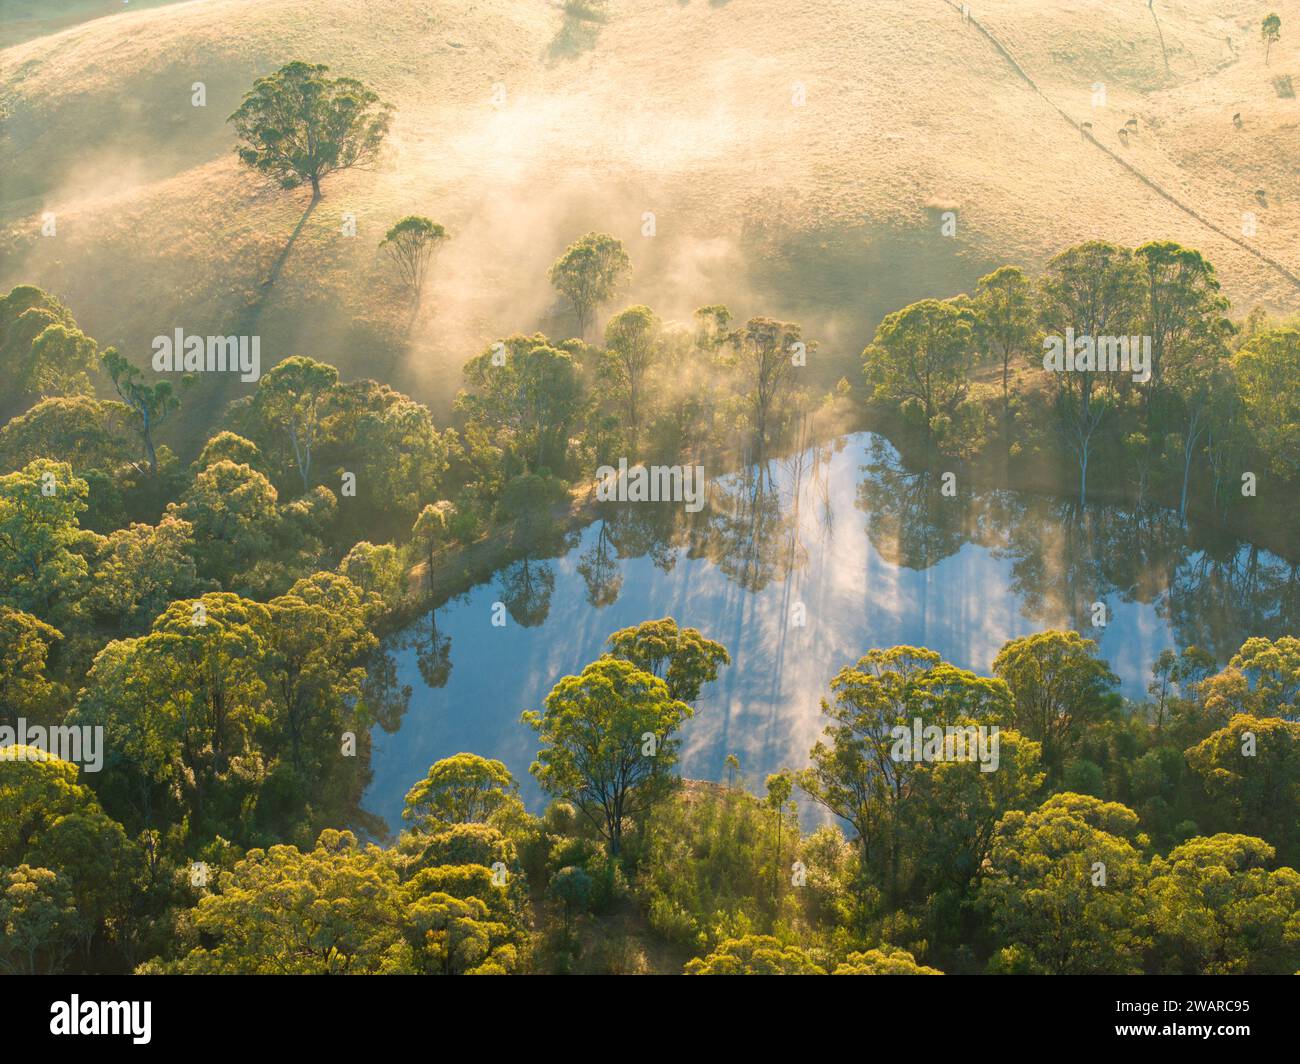 An awe-inspiring view of a tranquil pond located atop a mist-covered mountain peak Stock Photo